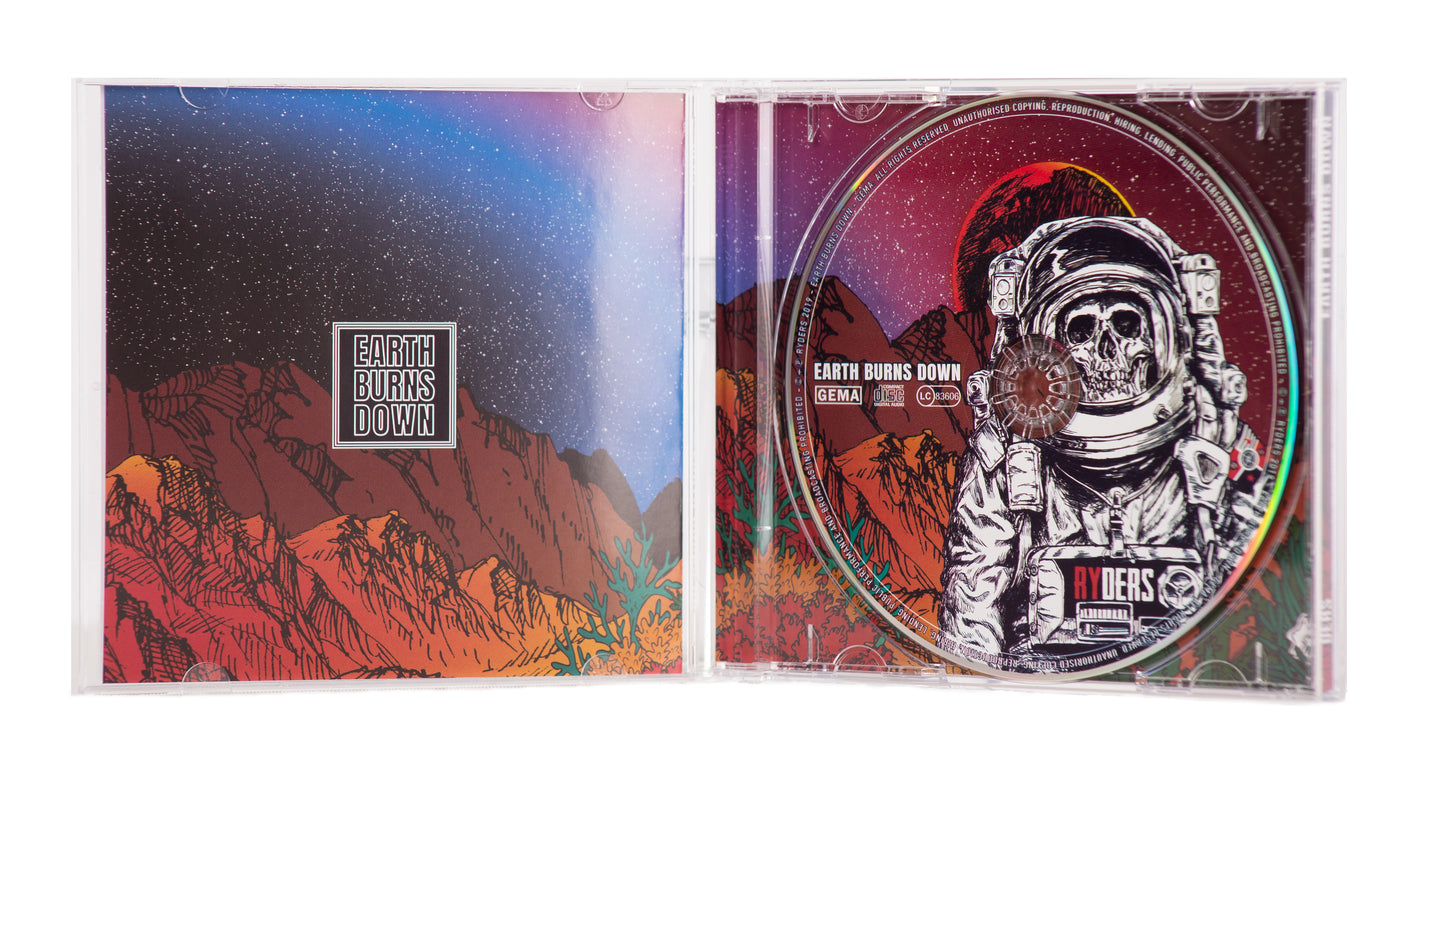 CD: Earth Burns Down Limited Edition